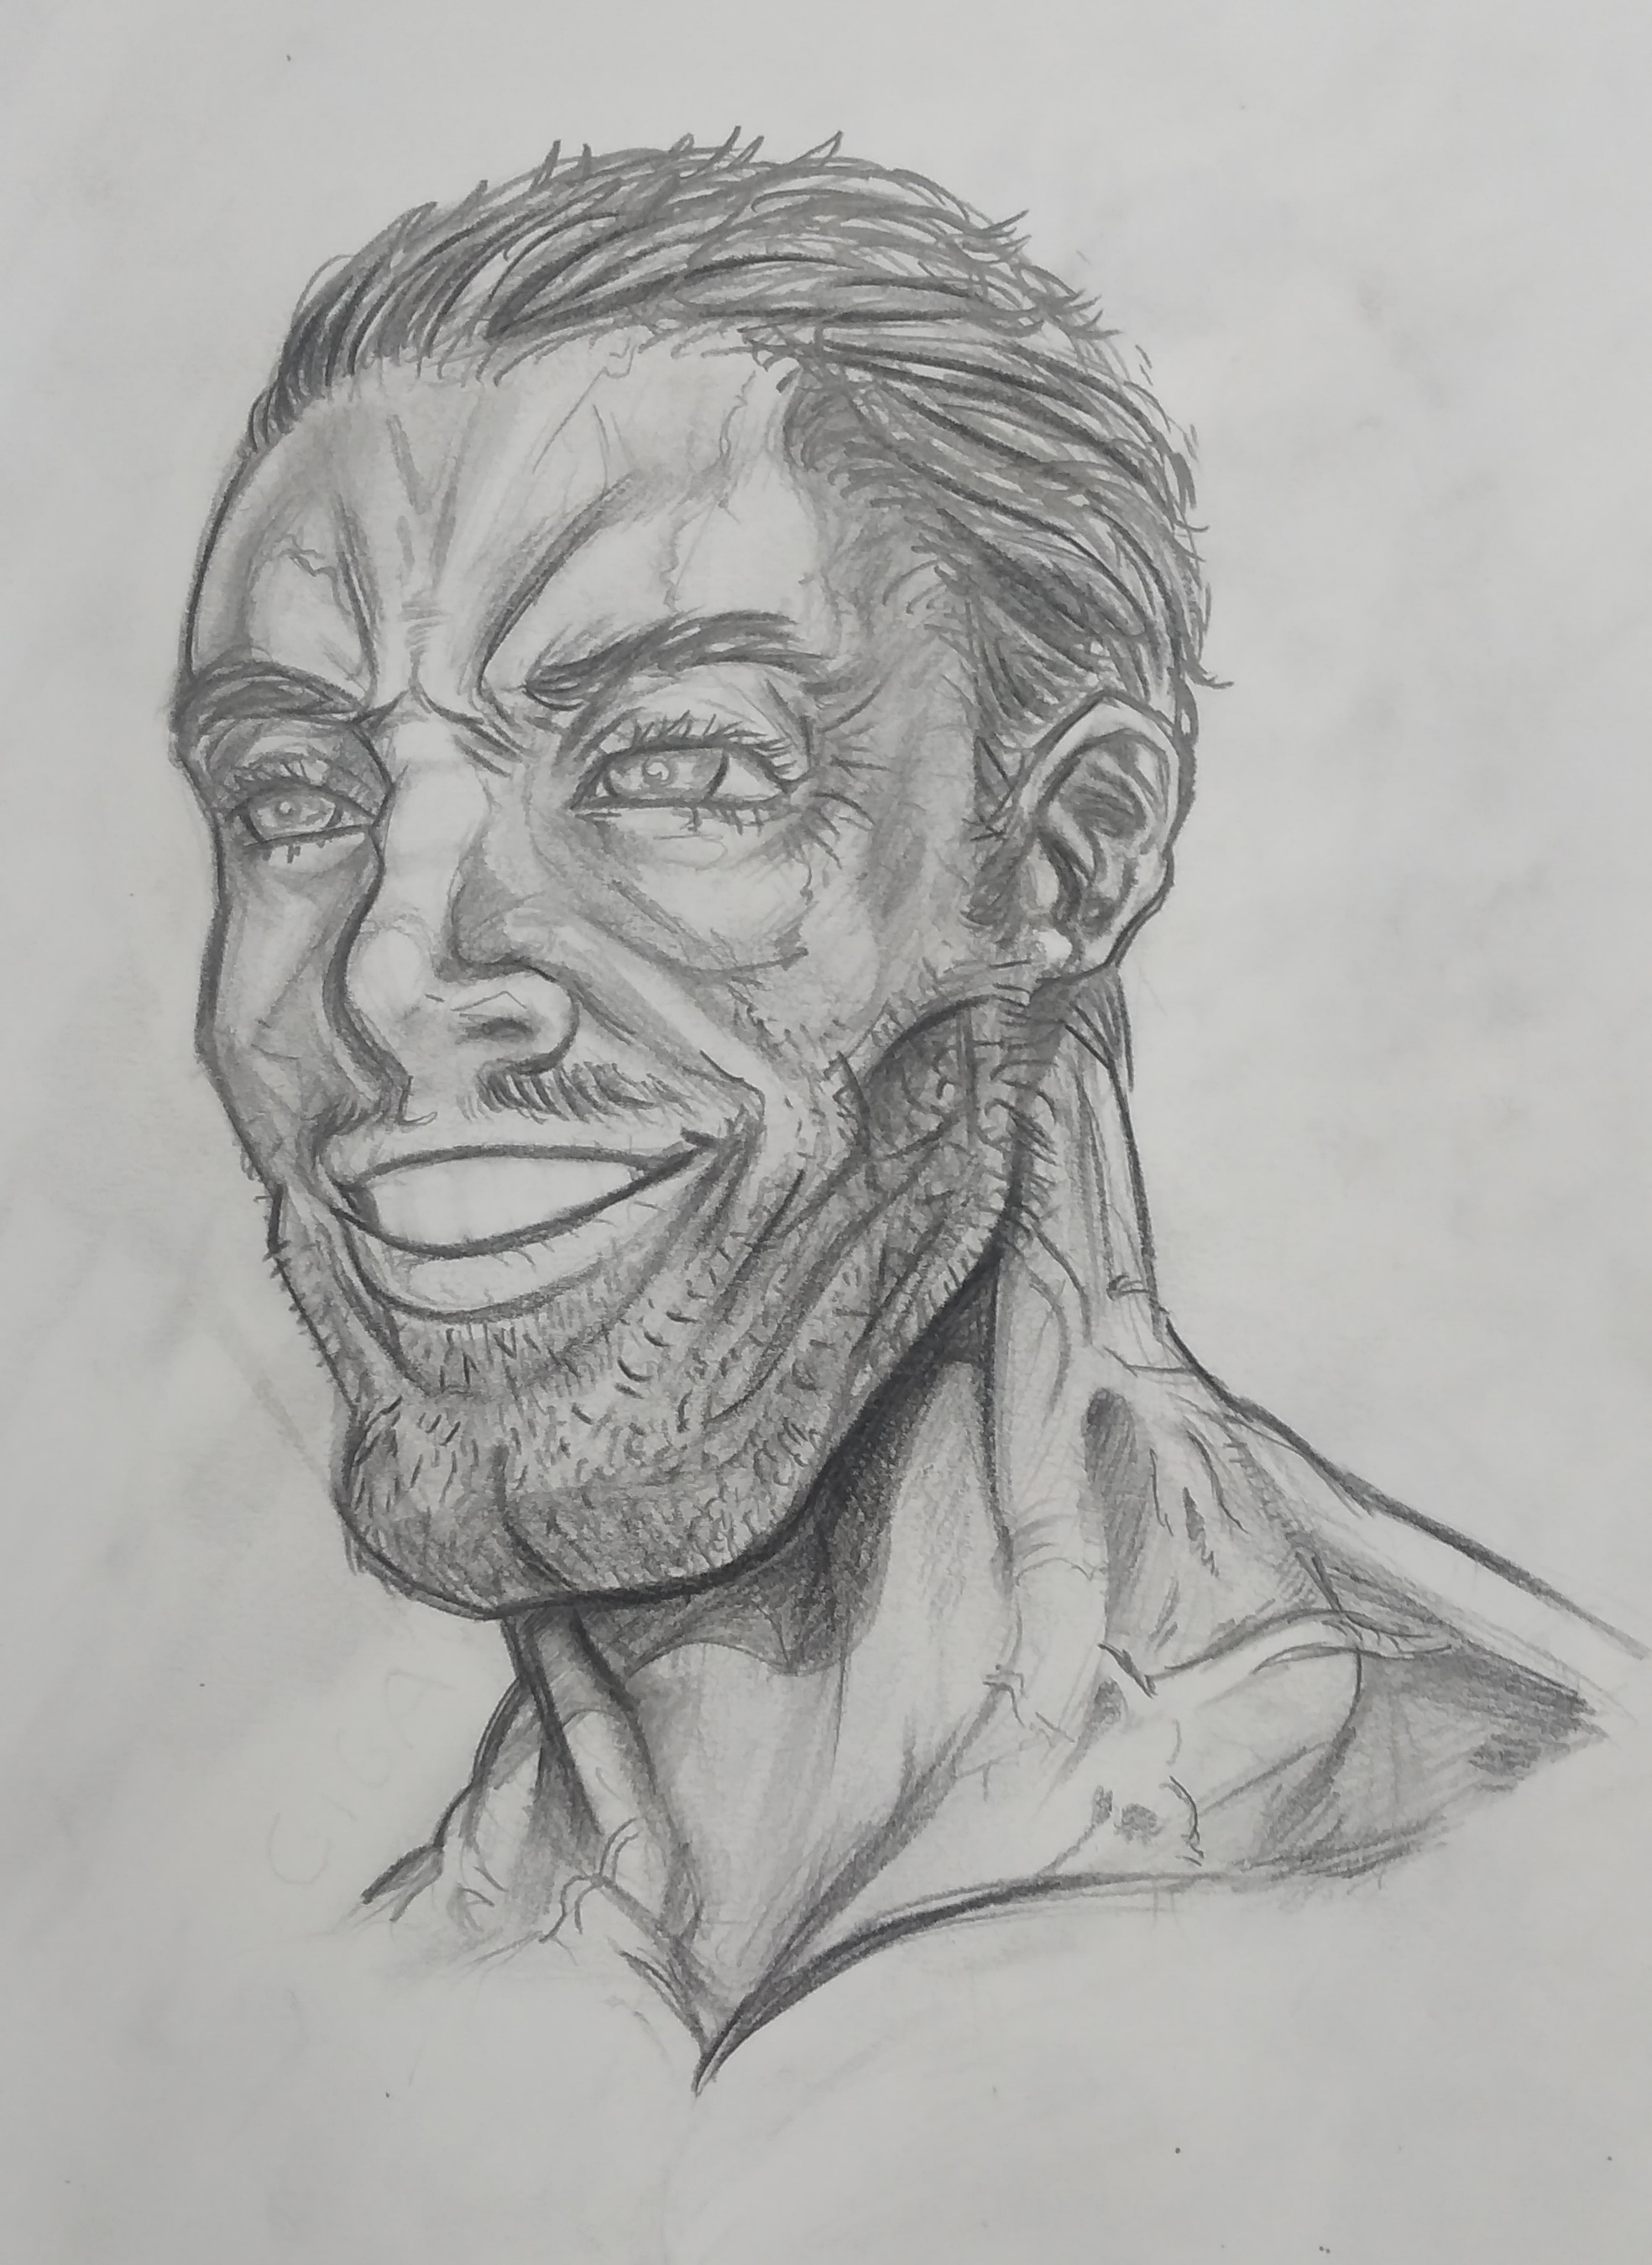 Chad face by Pawell2418 on DeviantArt